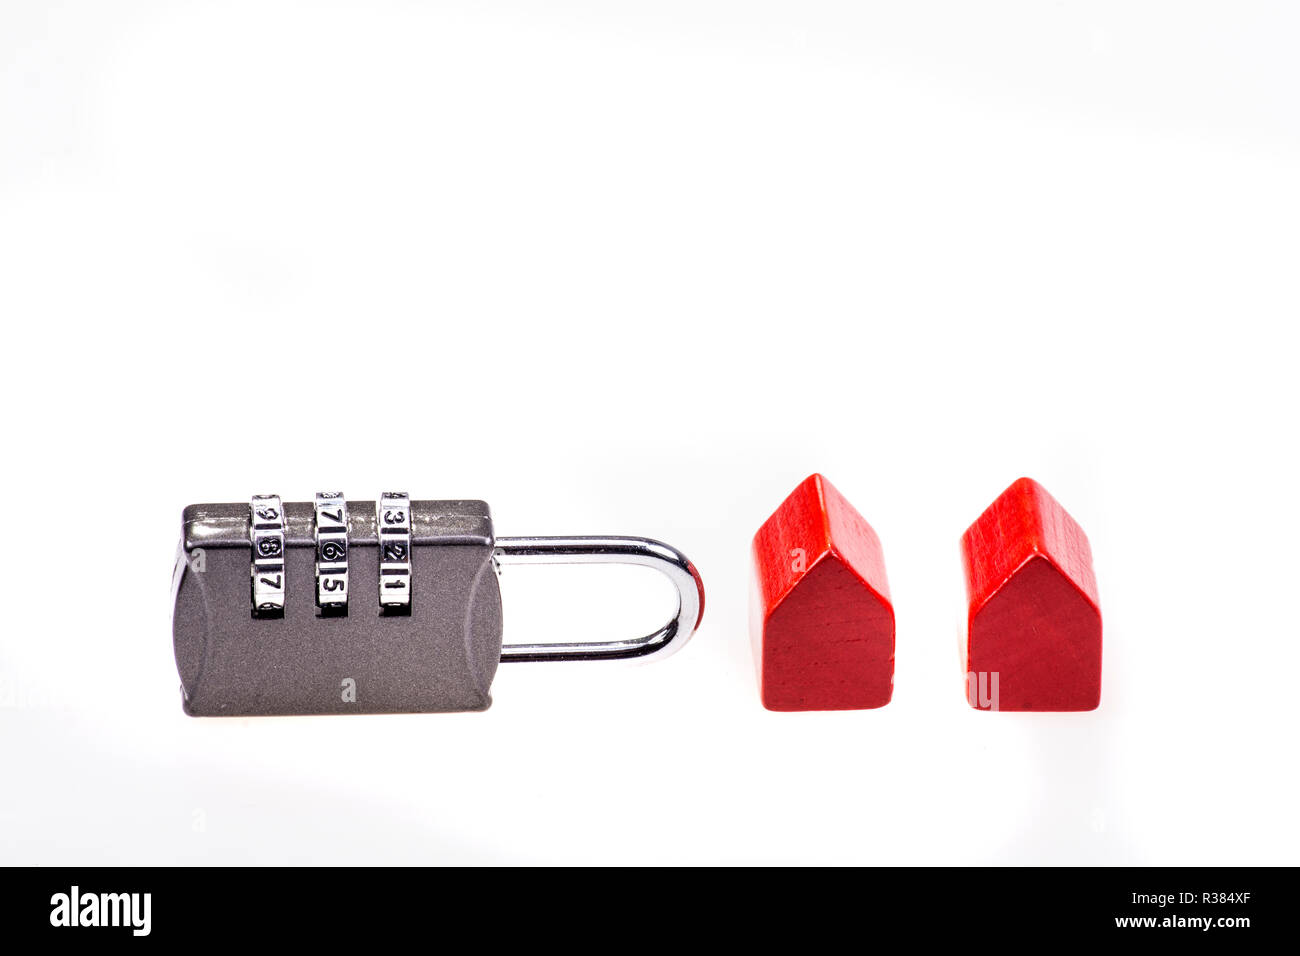 secure rentals Stock Photo